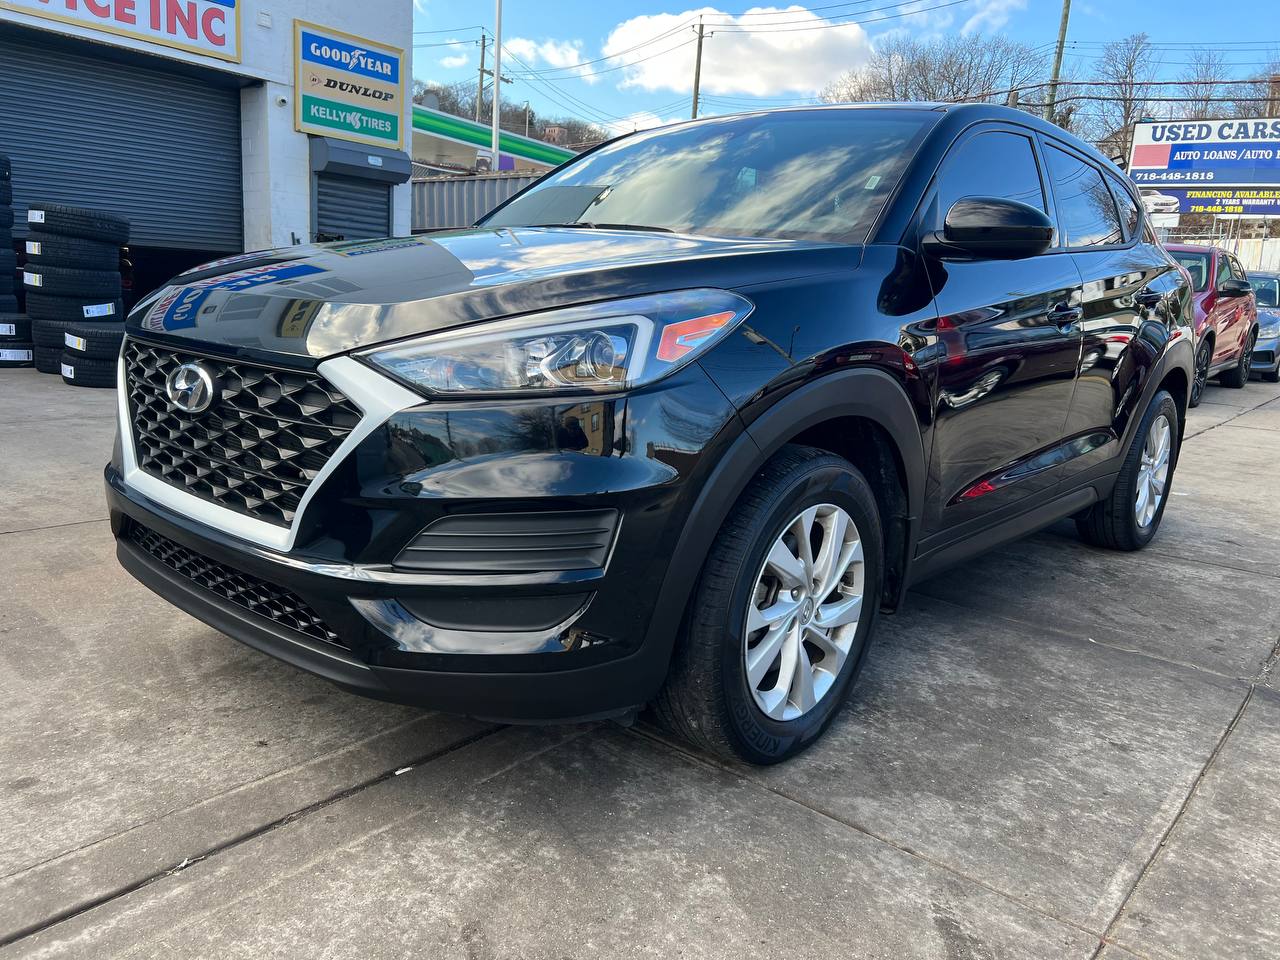 Used Car - 2019 Hyundai Tucson SE for Sale in Staten Island, NY